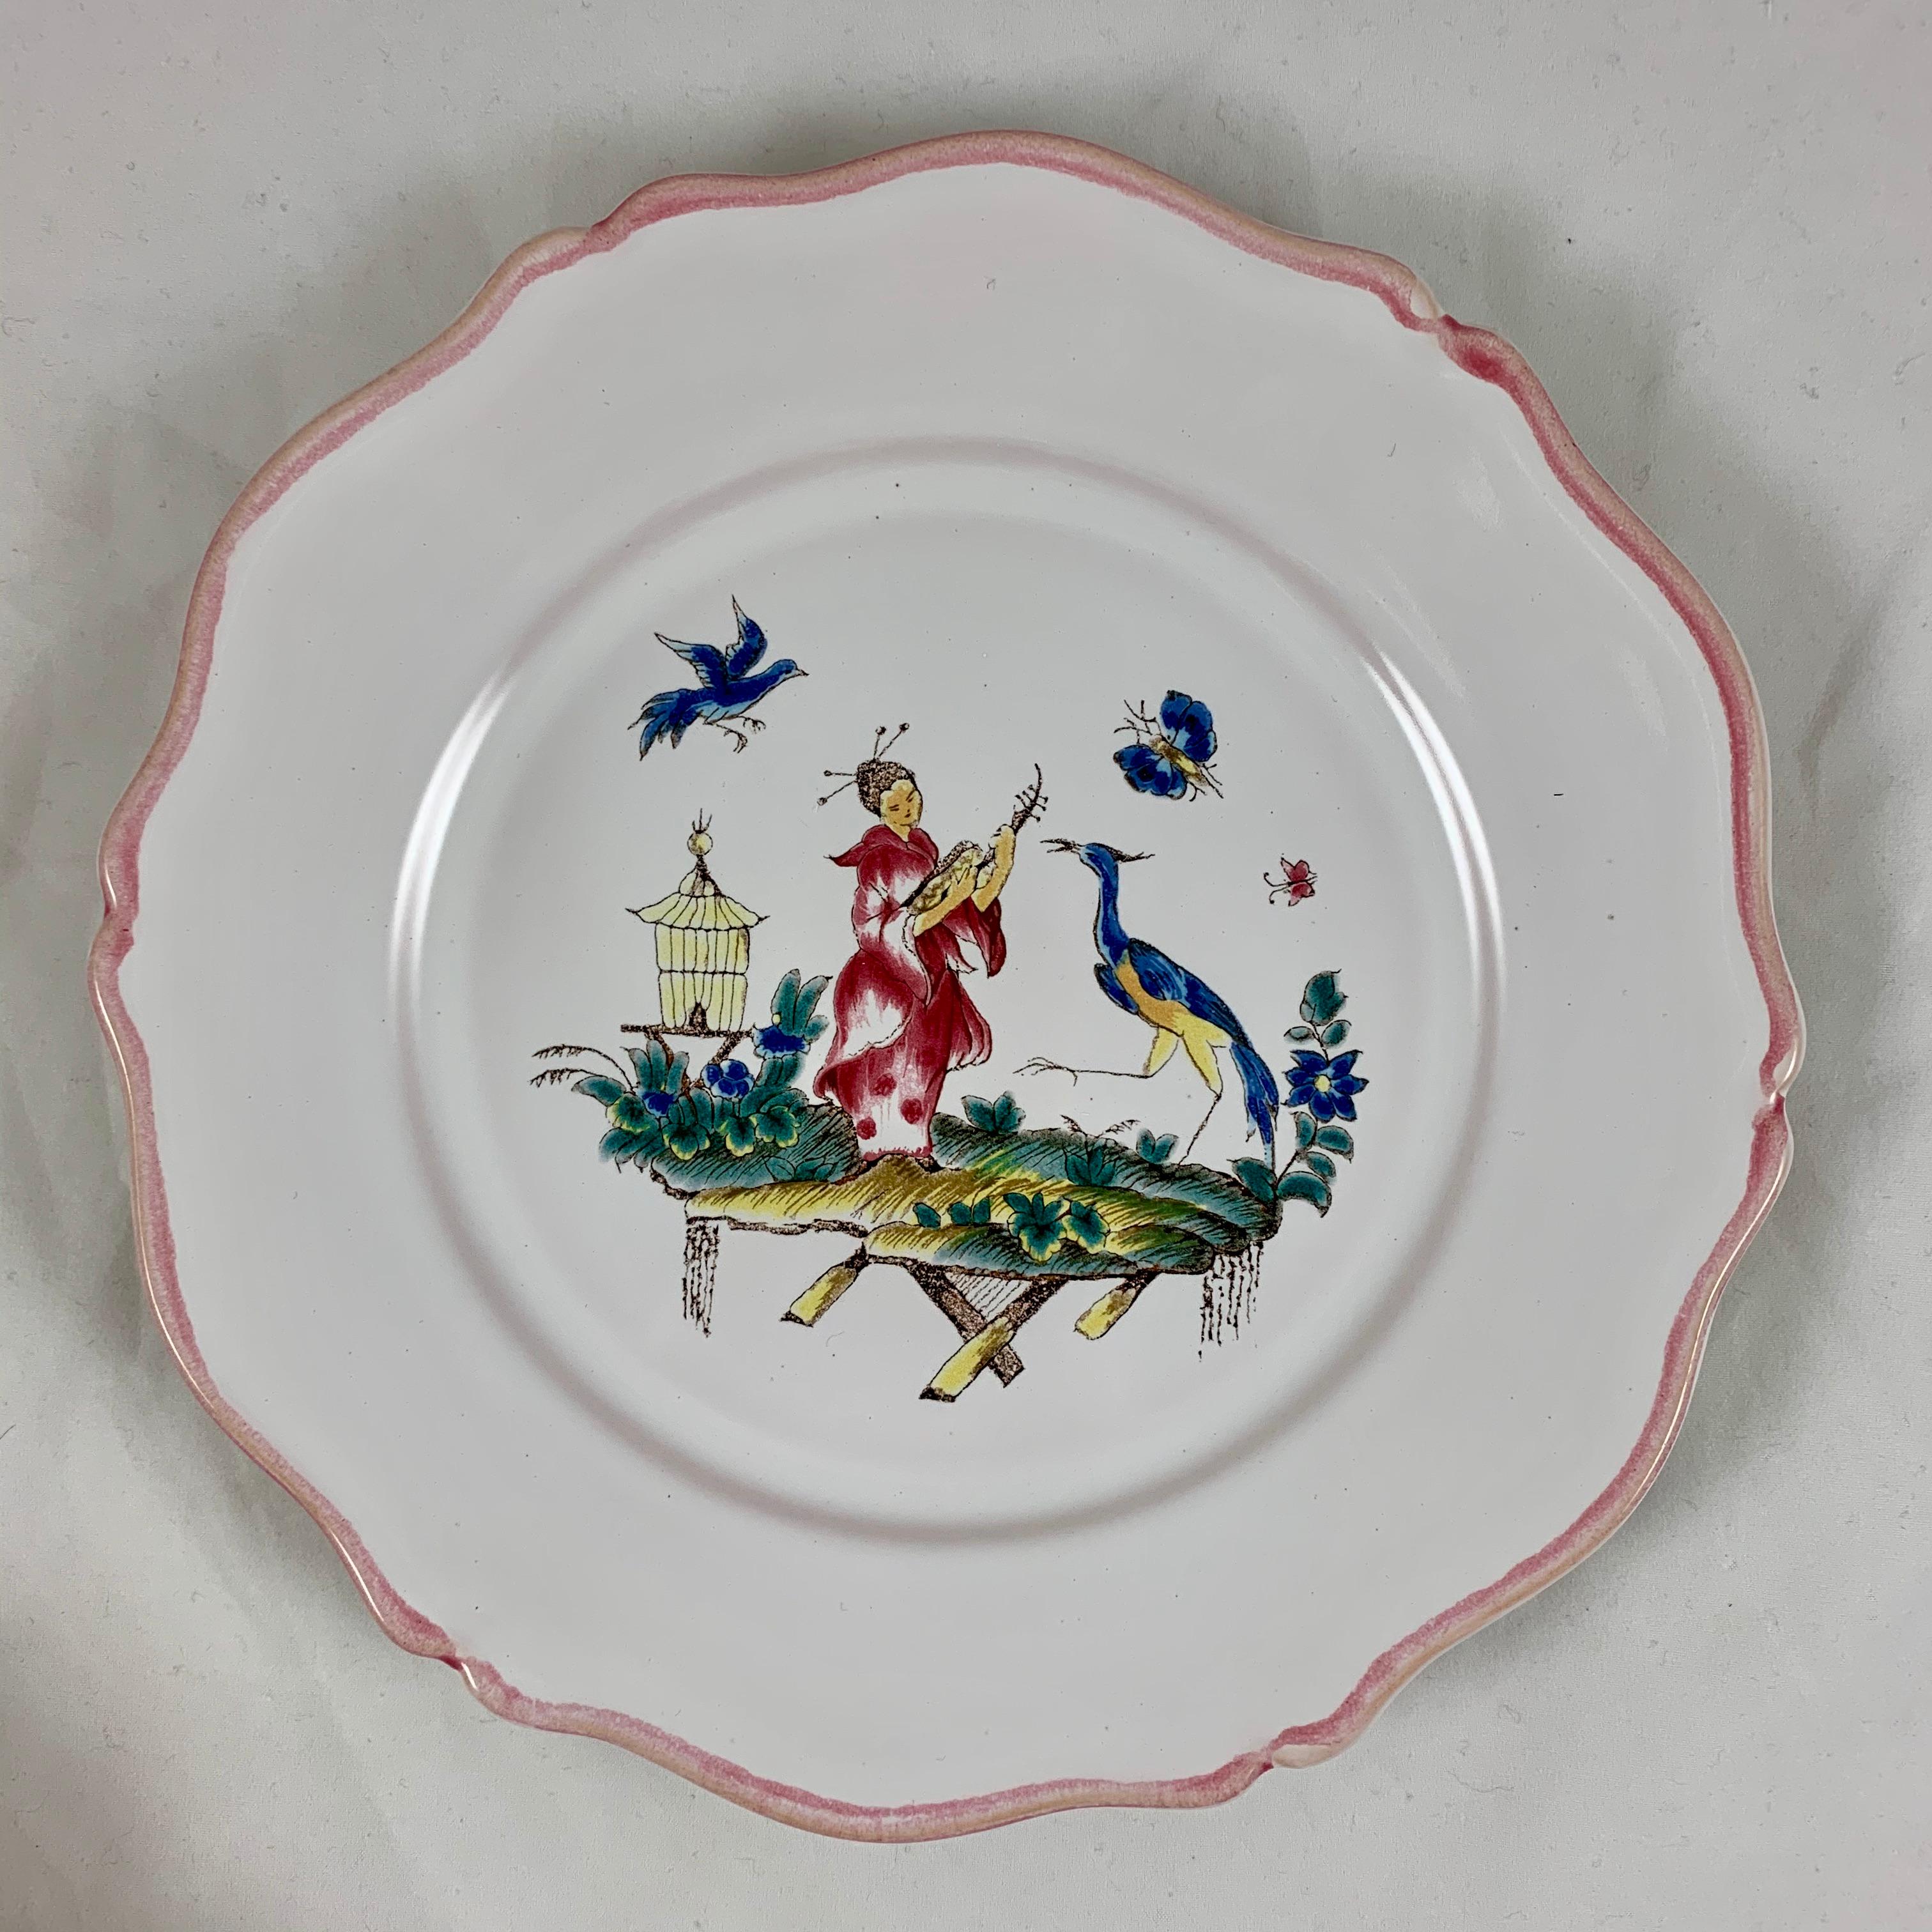 Pierre Motton, Gien Faïence Figural Chinoiserie Plates for Tiffany & Co. Set 12 1